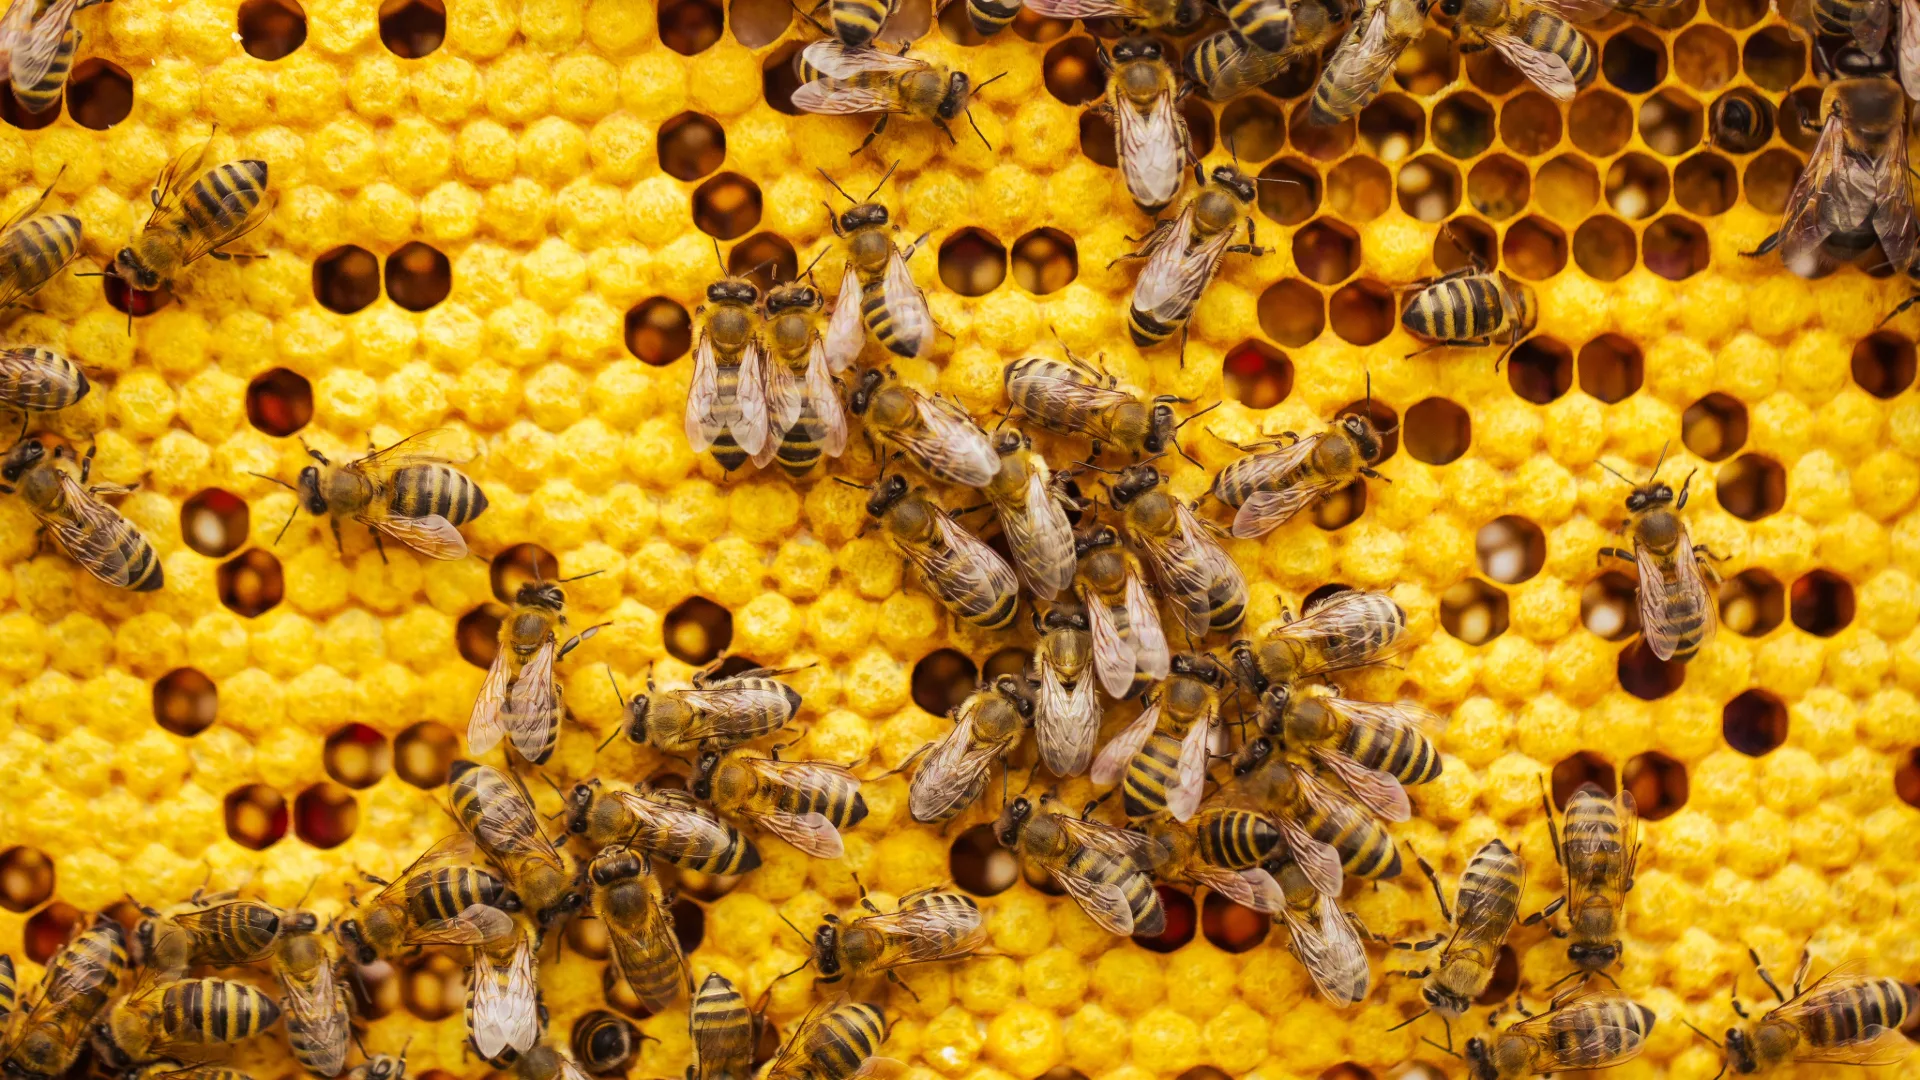 Bees crawling over a yellow side of honeycomb